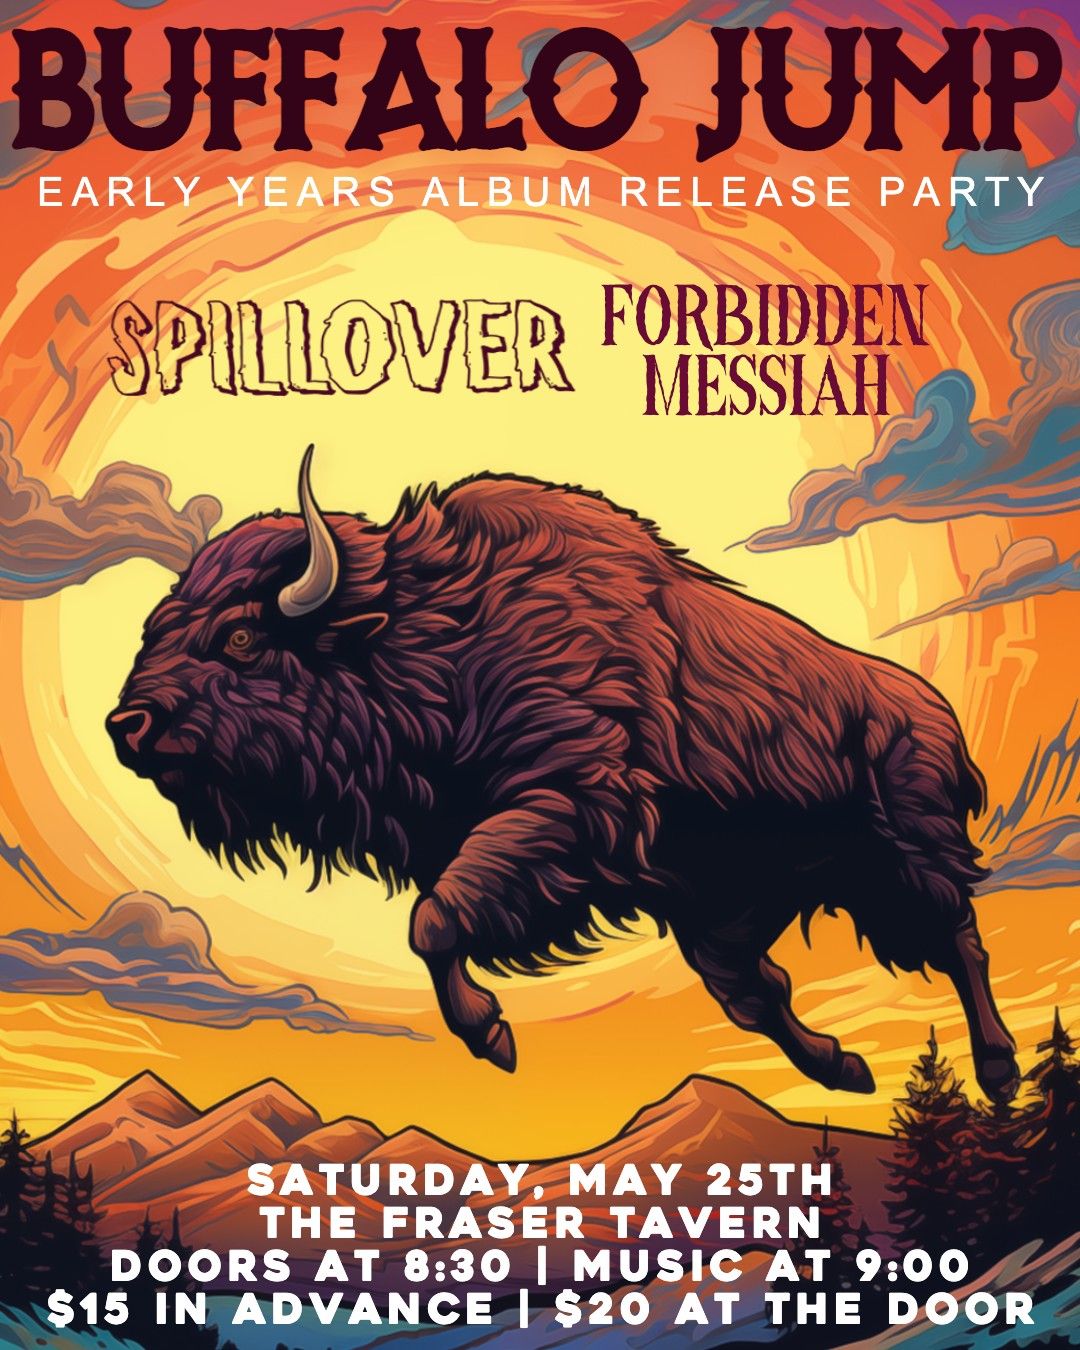 Buffalo Jump 'Early Years' Album Release Party